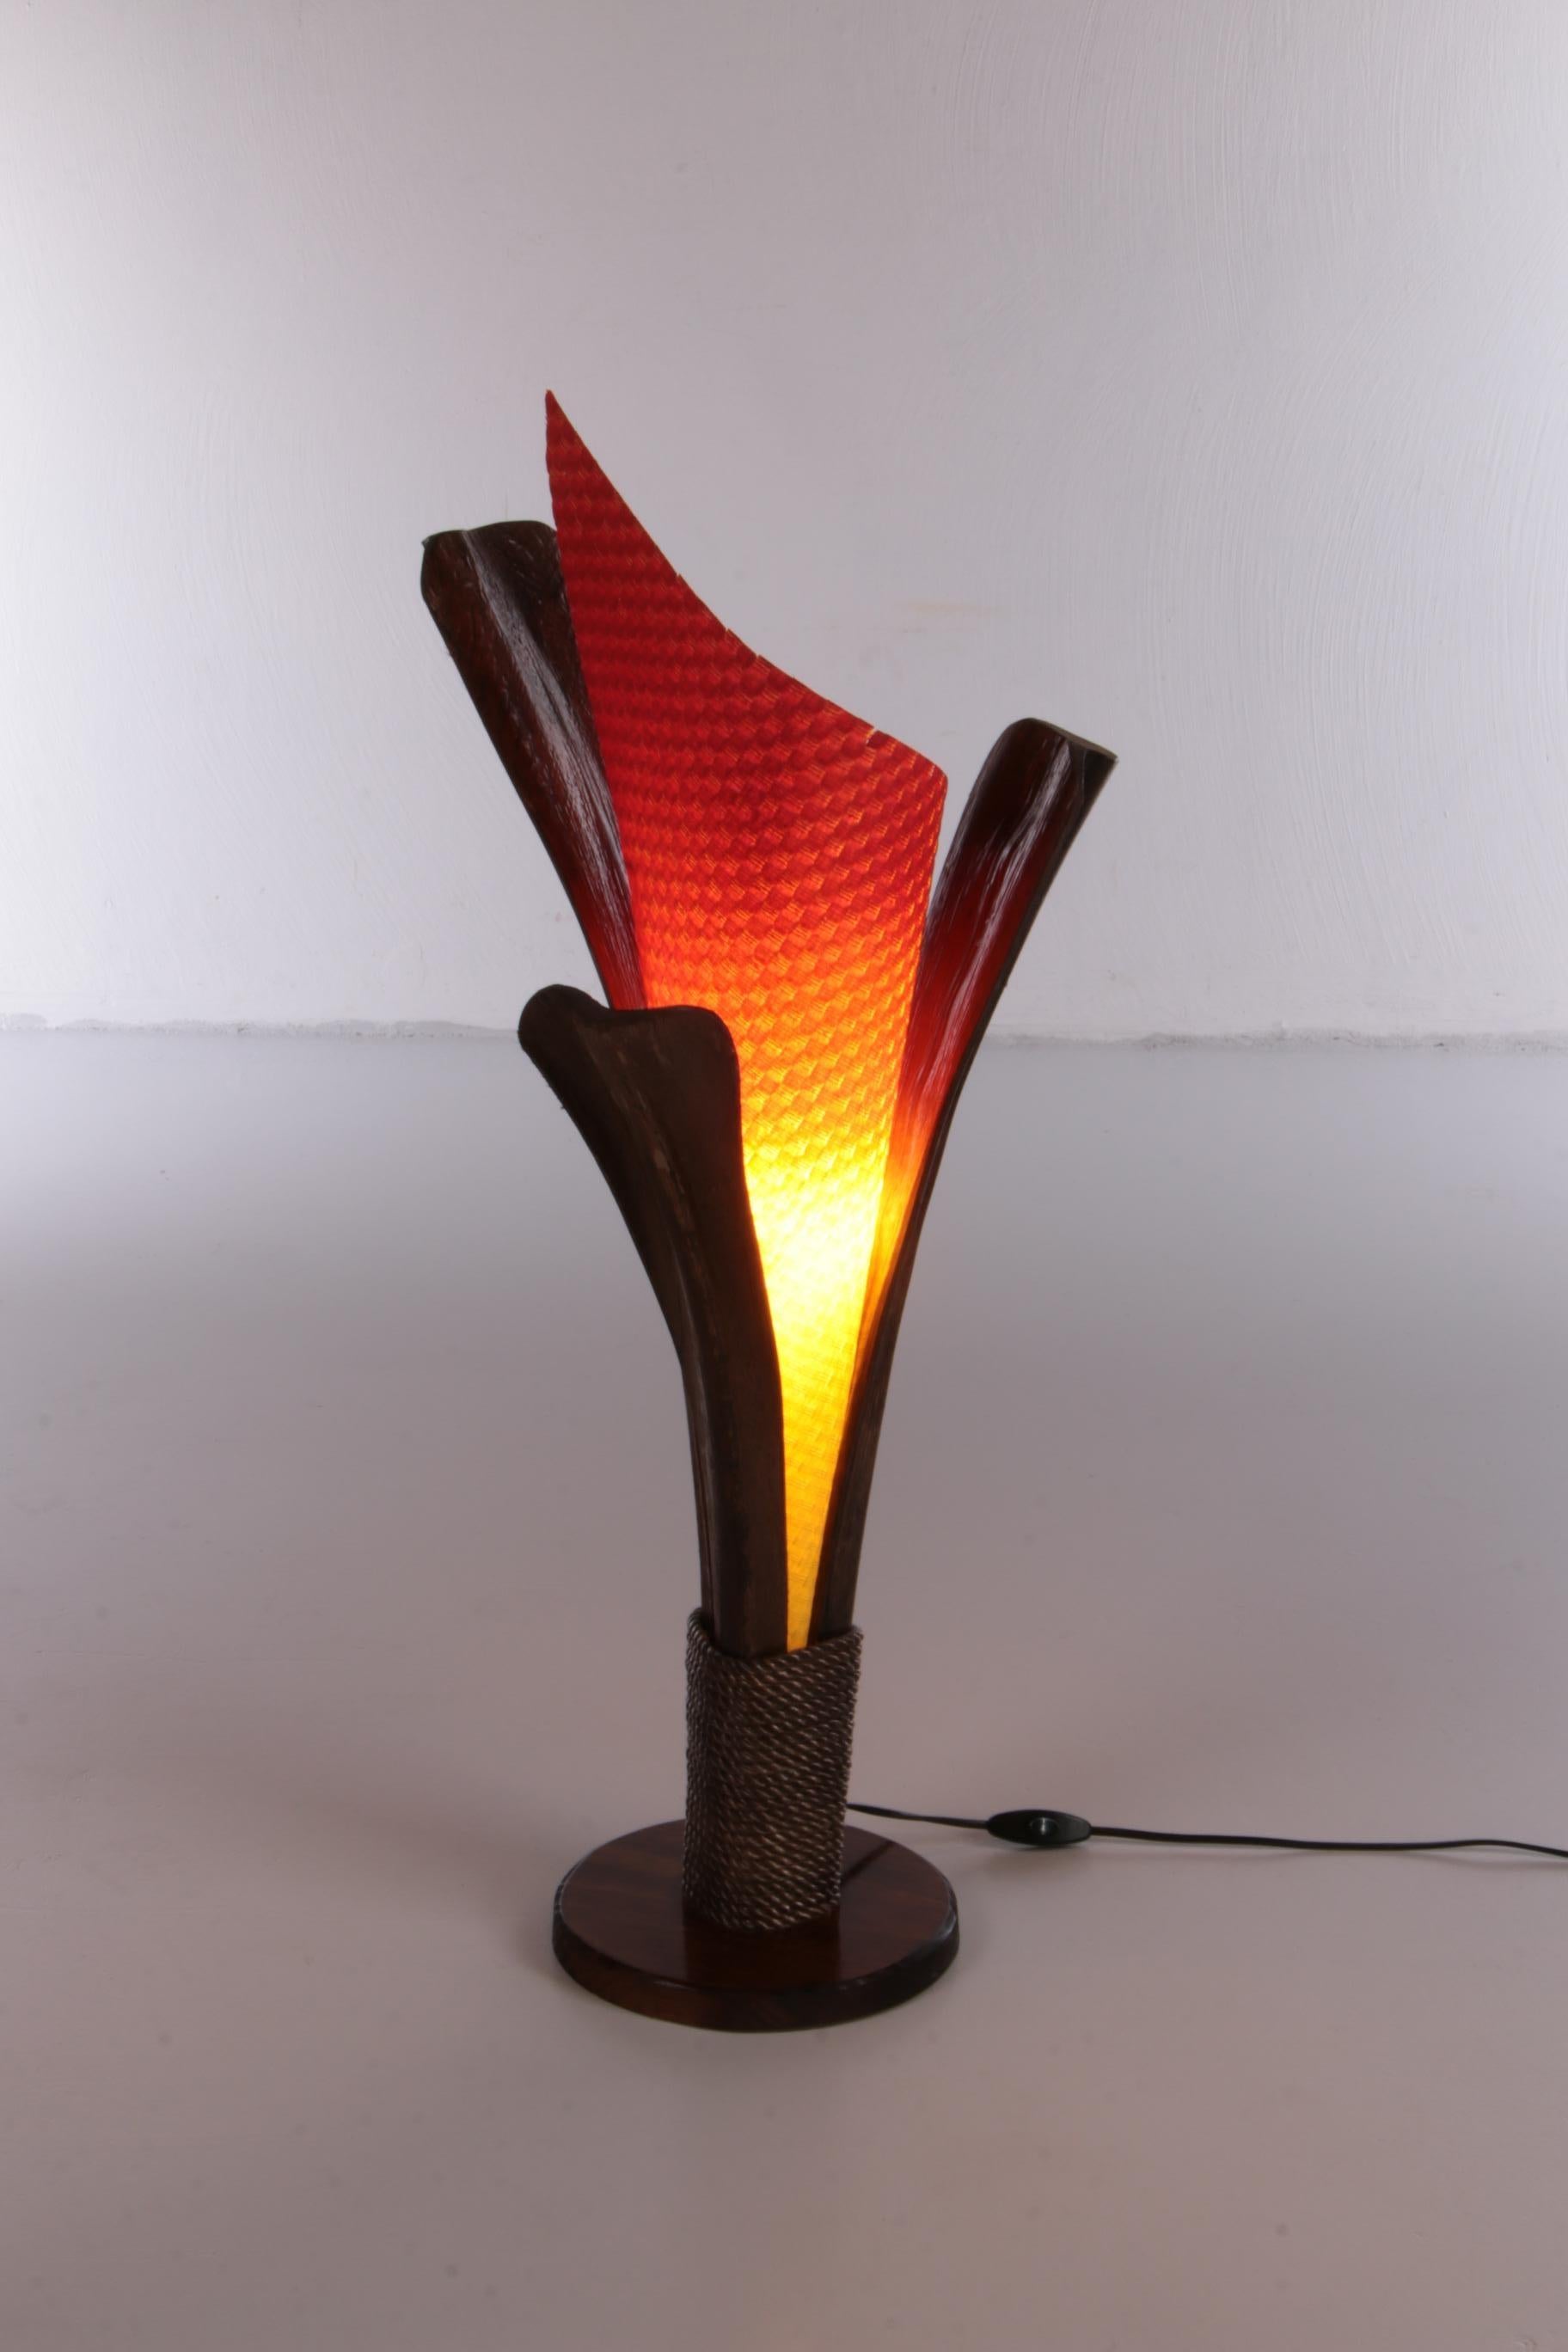 Beautiful vintage table lamp made in France in the 1980s.

The holder is made of dried palm tree bark, which gives the lamp a natural and rough look.

The lampshade is made of colored paper, which gives the impression of a flame. The lamp probably